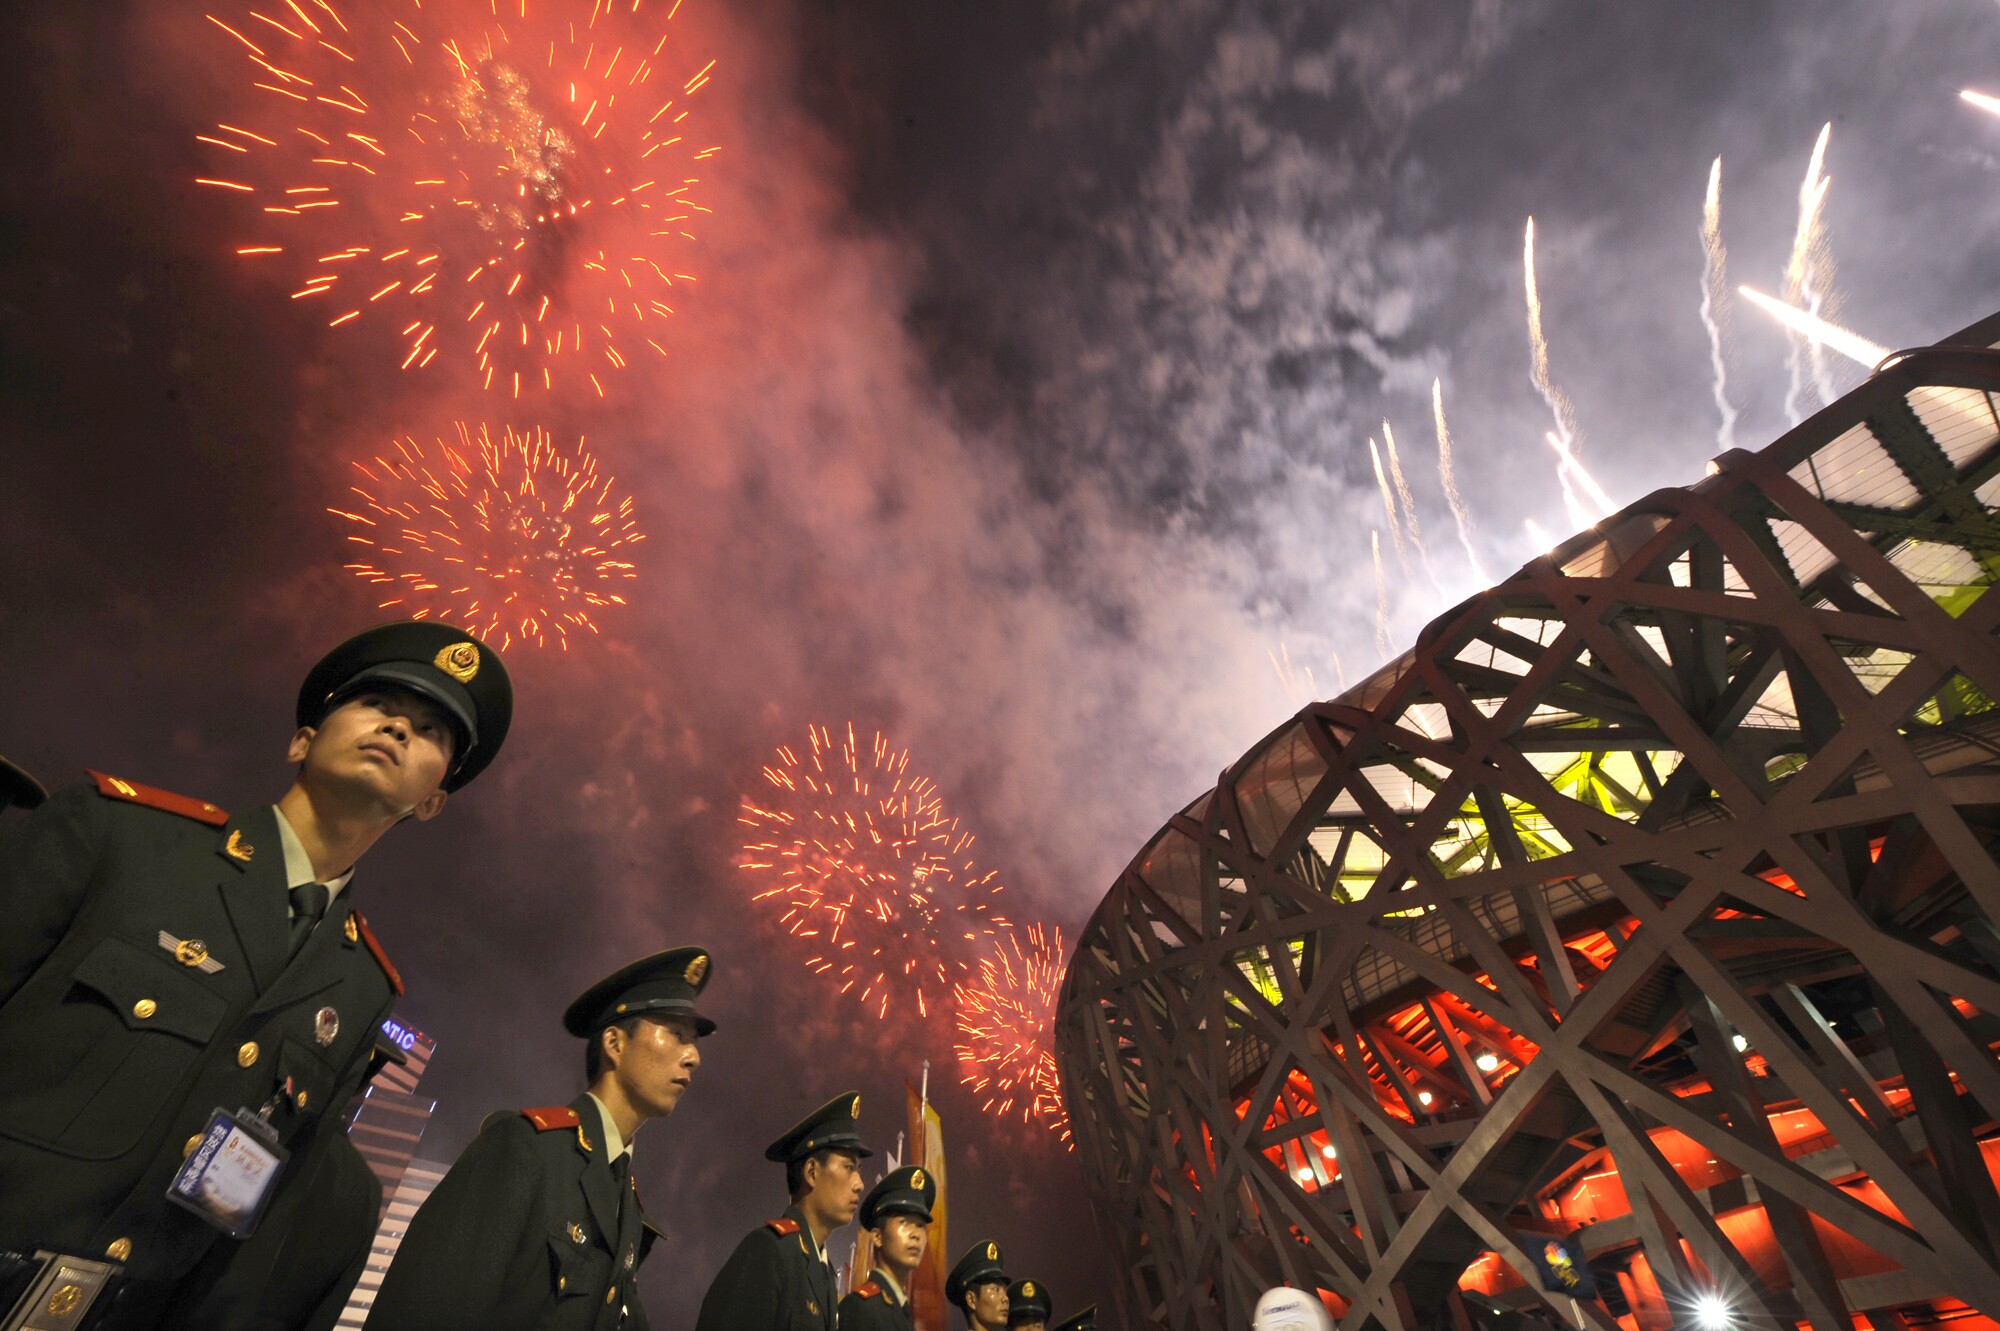 Soldiers stand outside the "bird's nest" stadium as fireworks go off above